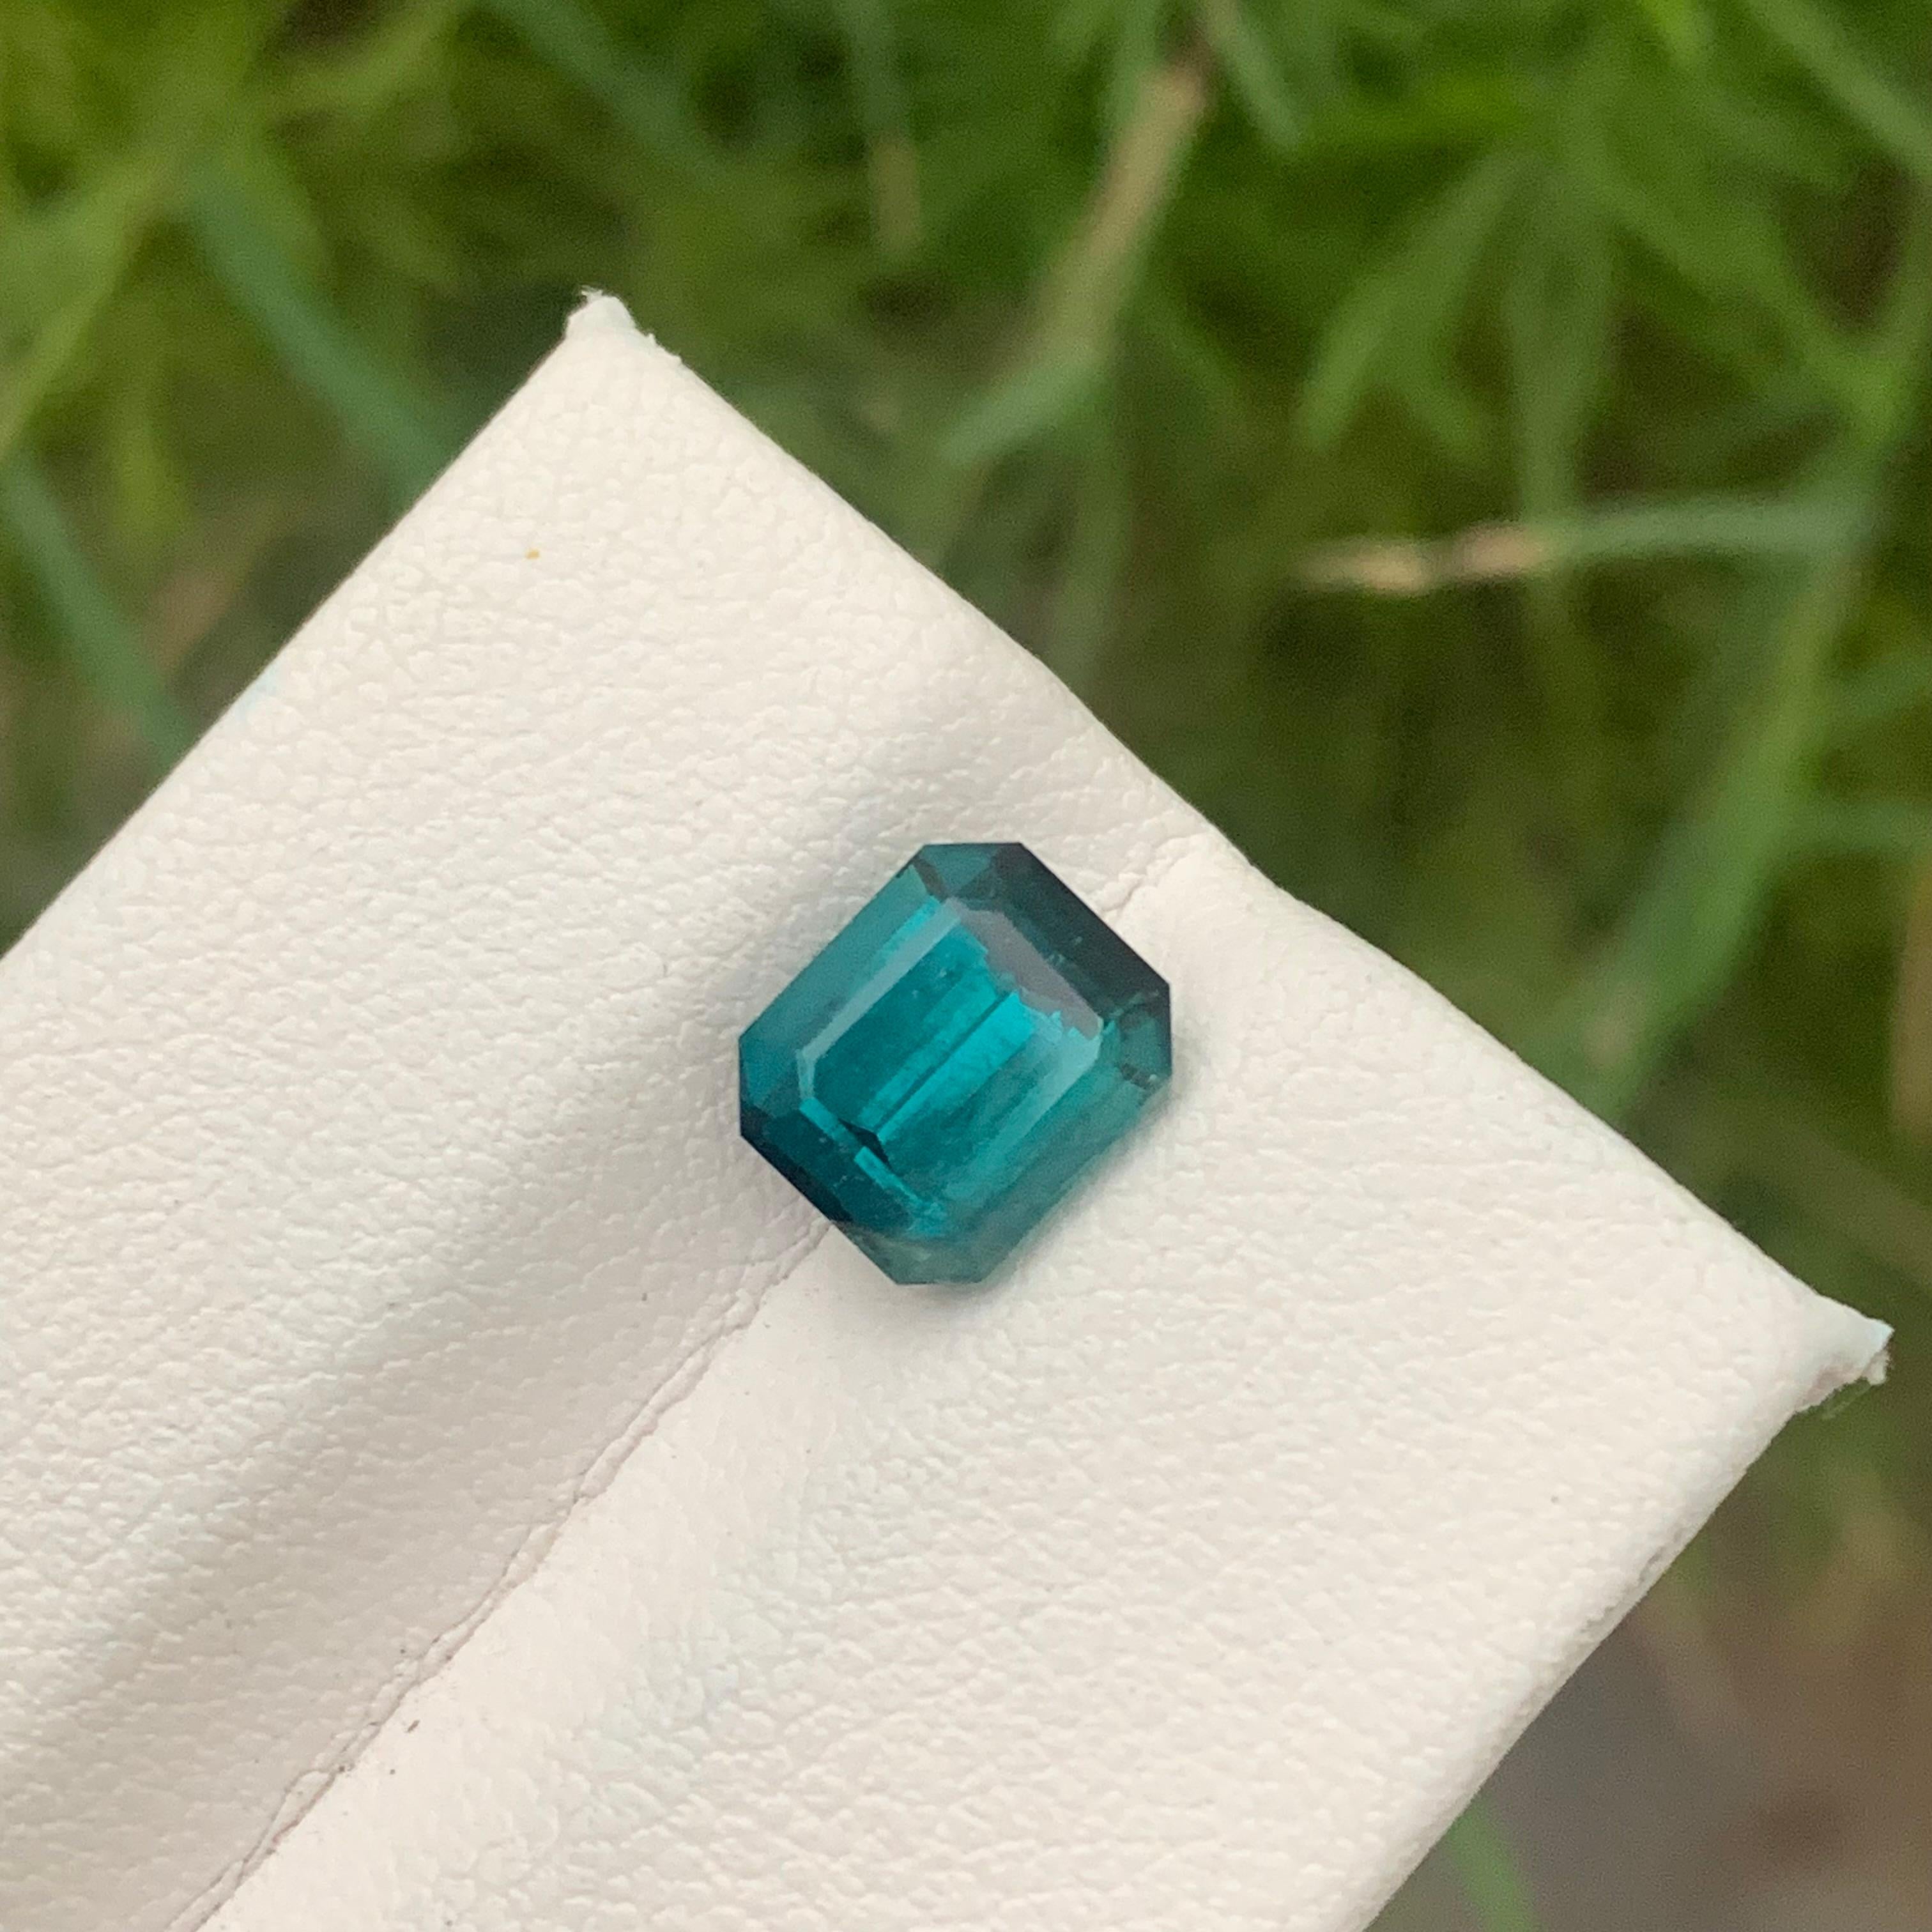 Women's or Men's 2.75 Carat Included Natural Loose Indicolite Tourmaline Emerald Cut Ring Gem For Sale